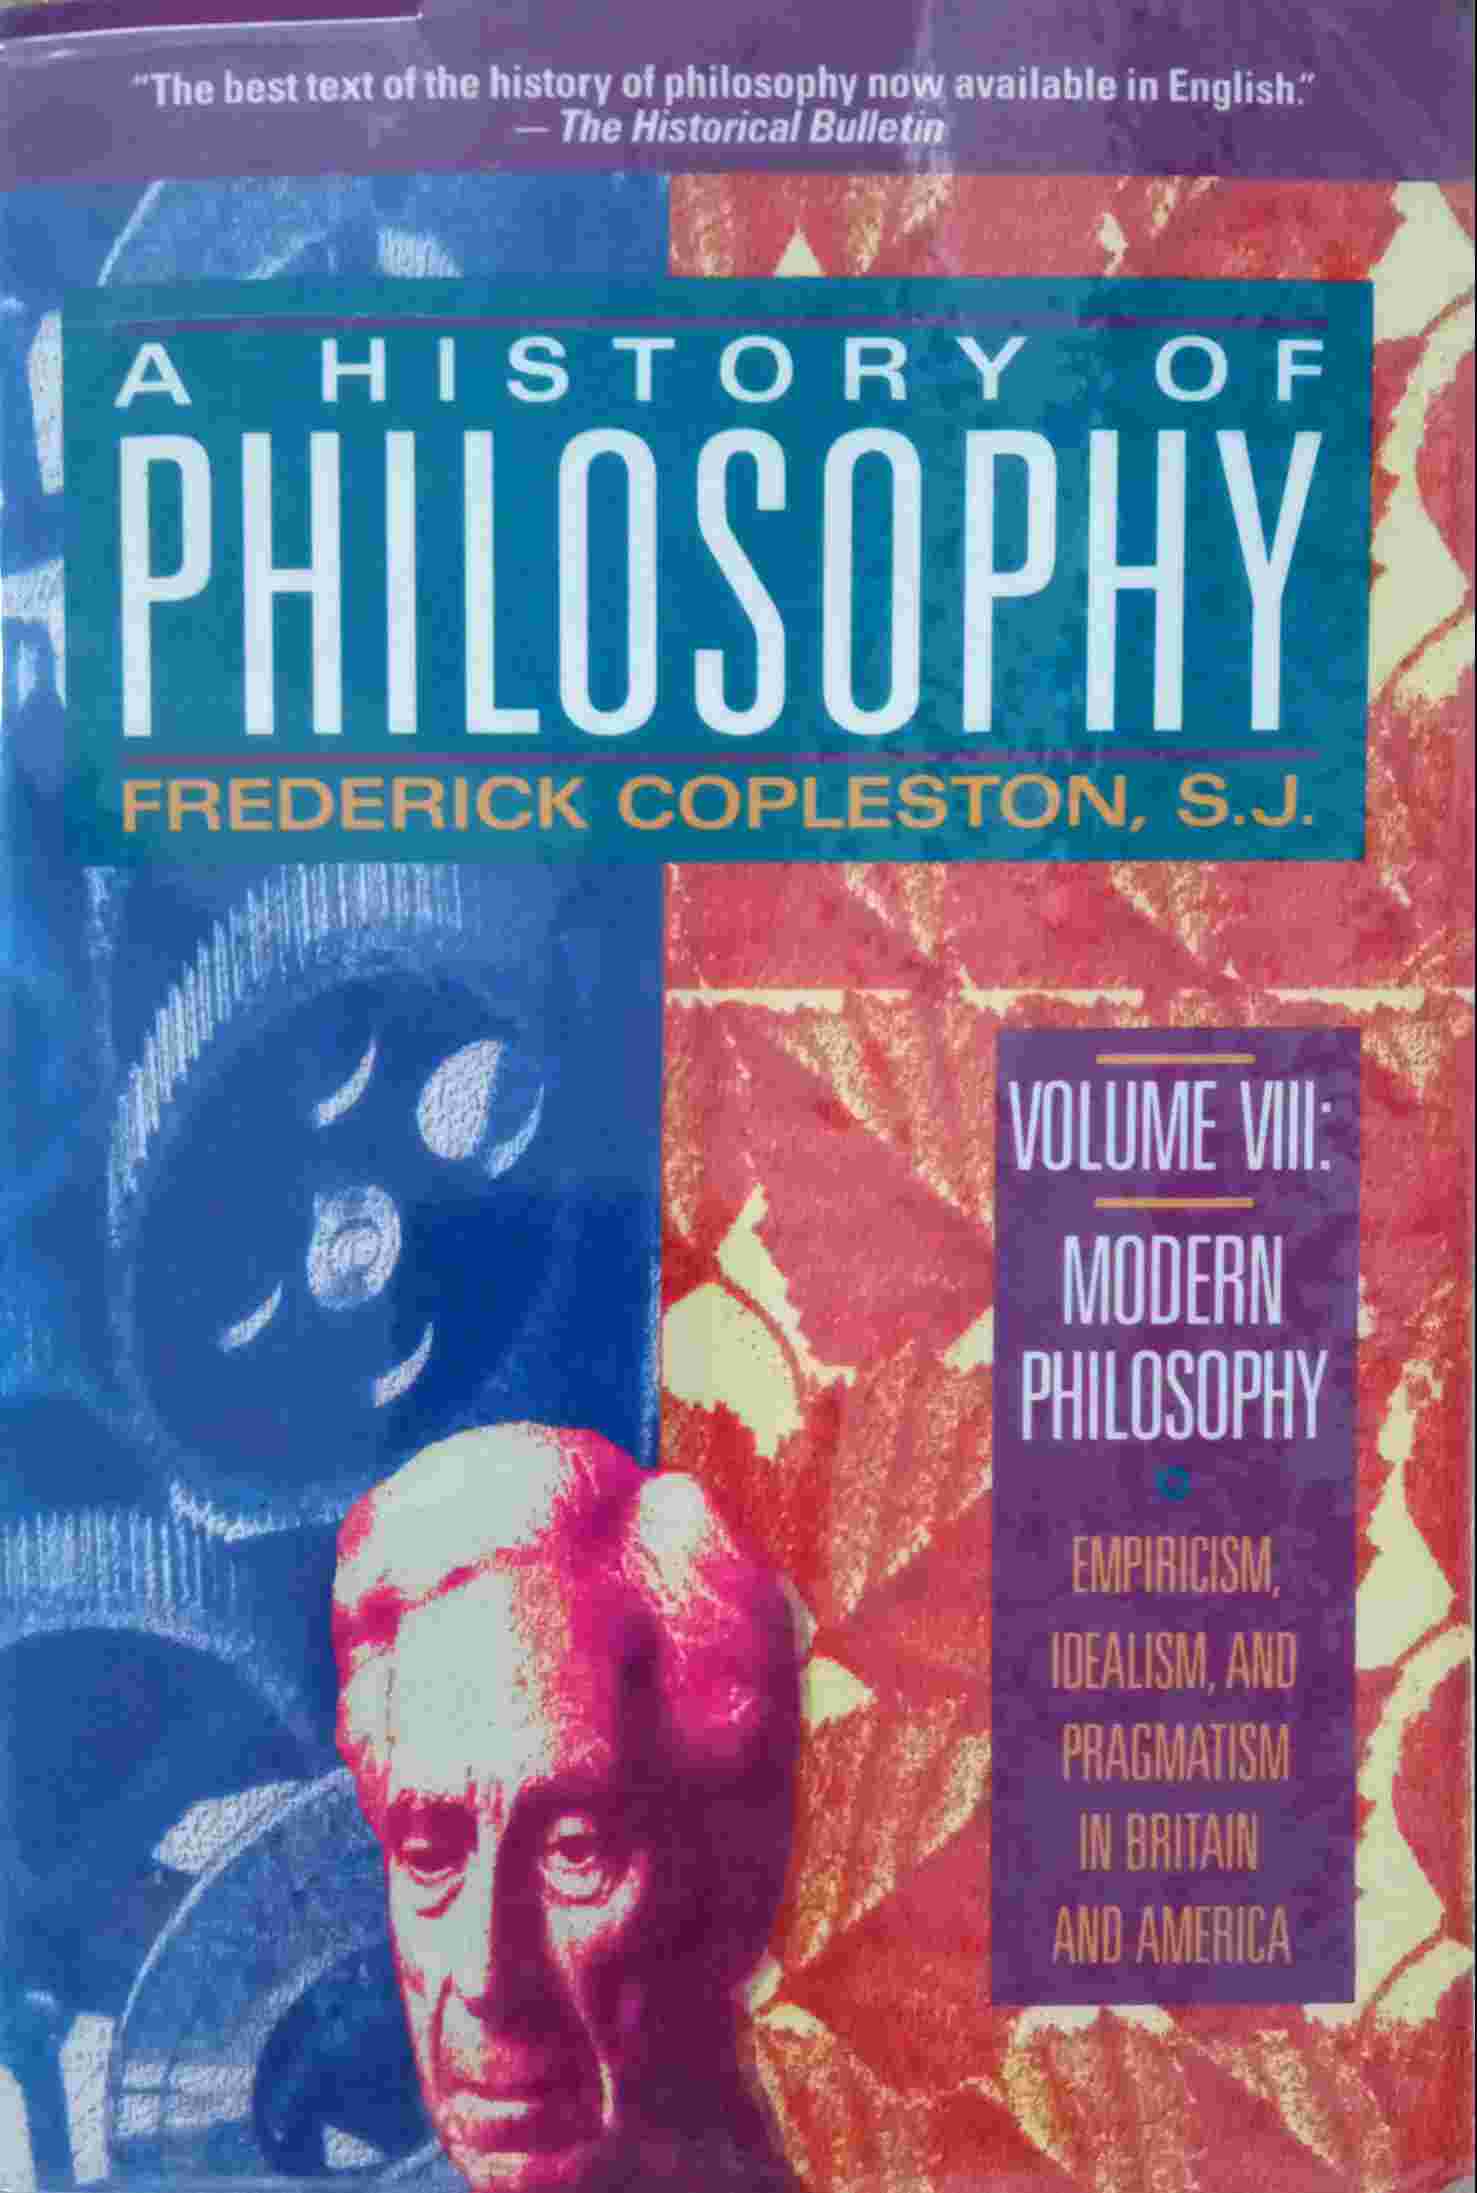 A HISTORY OF PHILOSOPHY: MODERN PHILOSOPHY: EMPIRICISM, IDEALISM, AND PRAGMATISM IN BRITAIN AND AMERICA